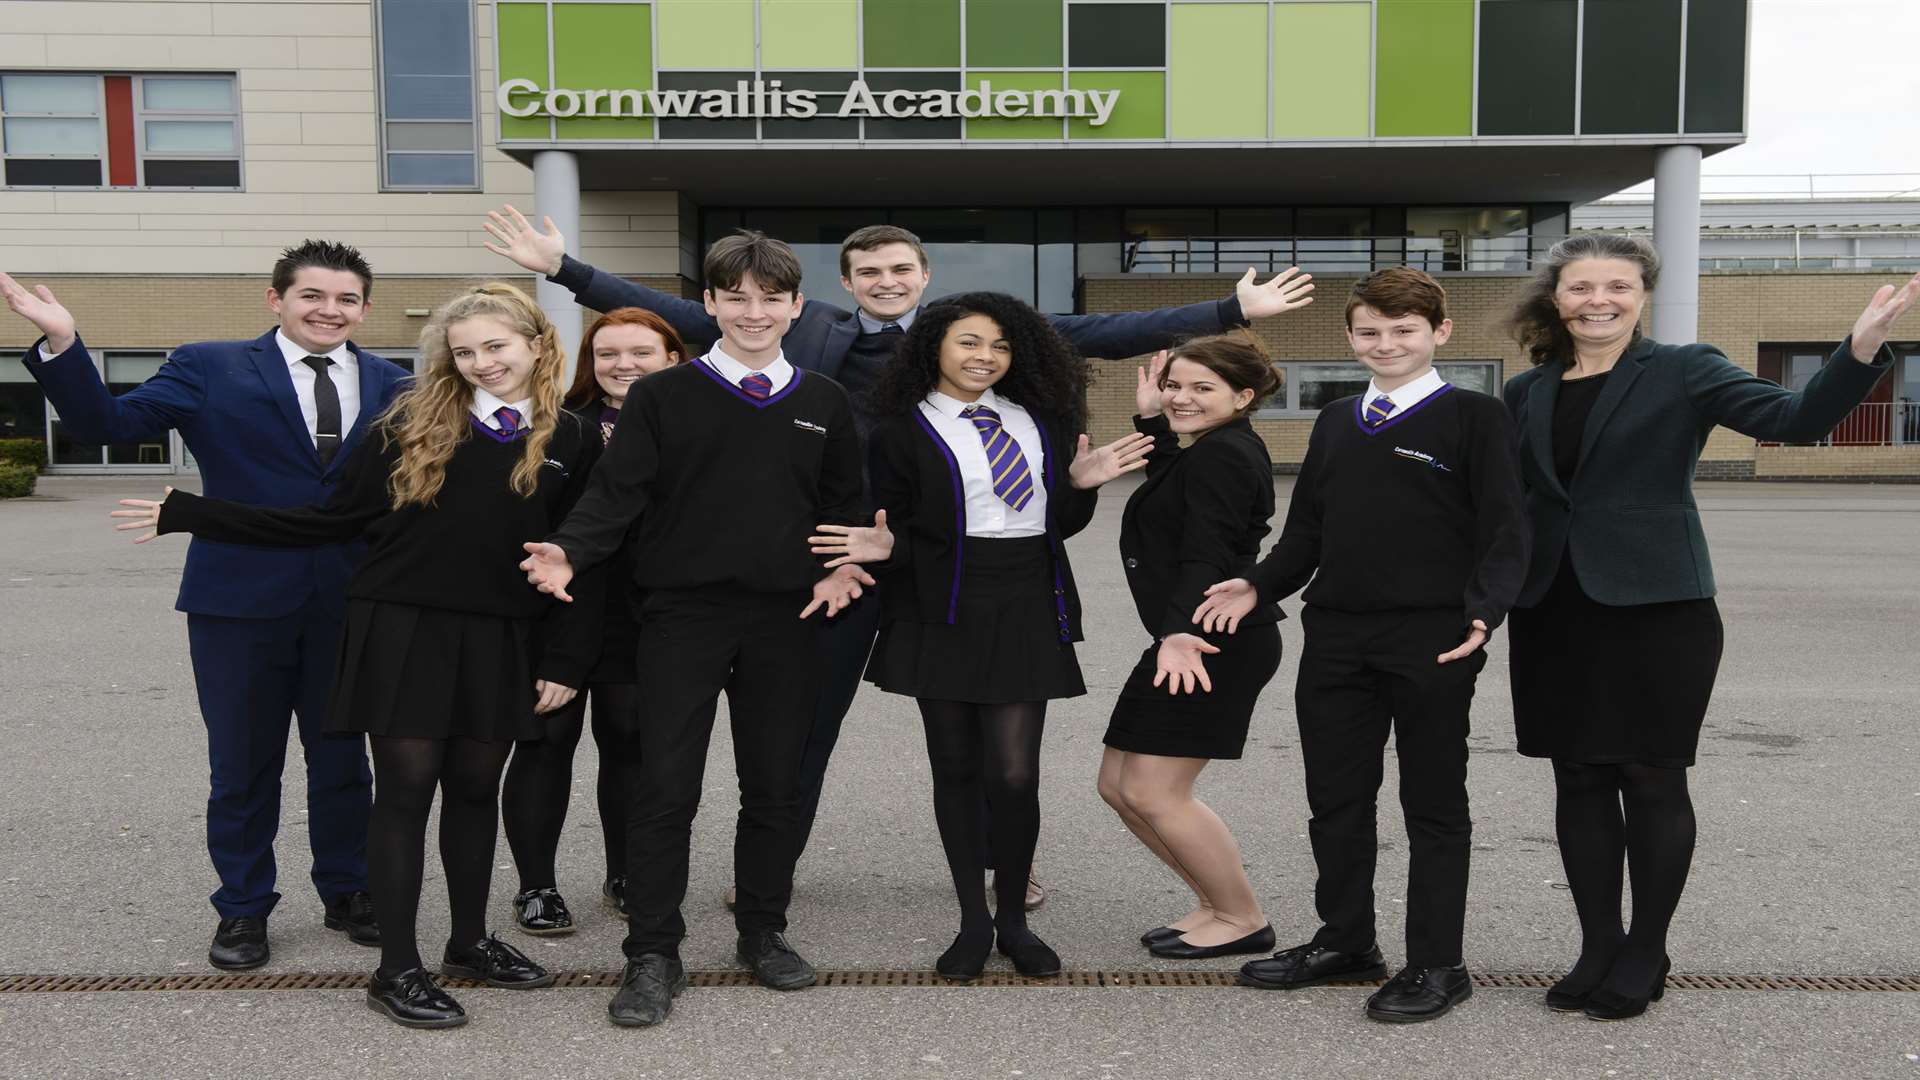 From left, Mason Dadson, 17, Abigail Aldrich, 14, Stacey Wright, 18, Jason Graham, 14, George Watts, 17, Taaliah Carter, 12, Tayla Barry, 17, Finley Smith, 13, and headteacher Isabelle Linney-Drouet. Cornwallis Academy, Hubbards Lane, Maidstone, pleased with their "good" Ofsted report and the achievements of the sixth formers.